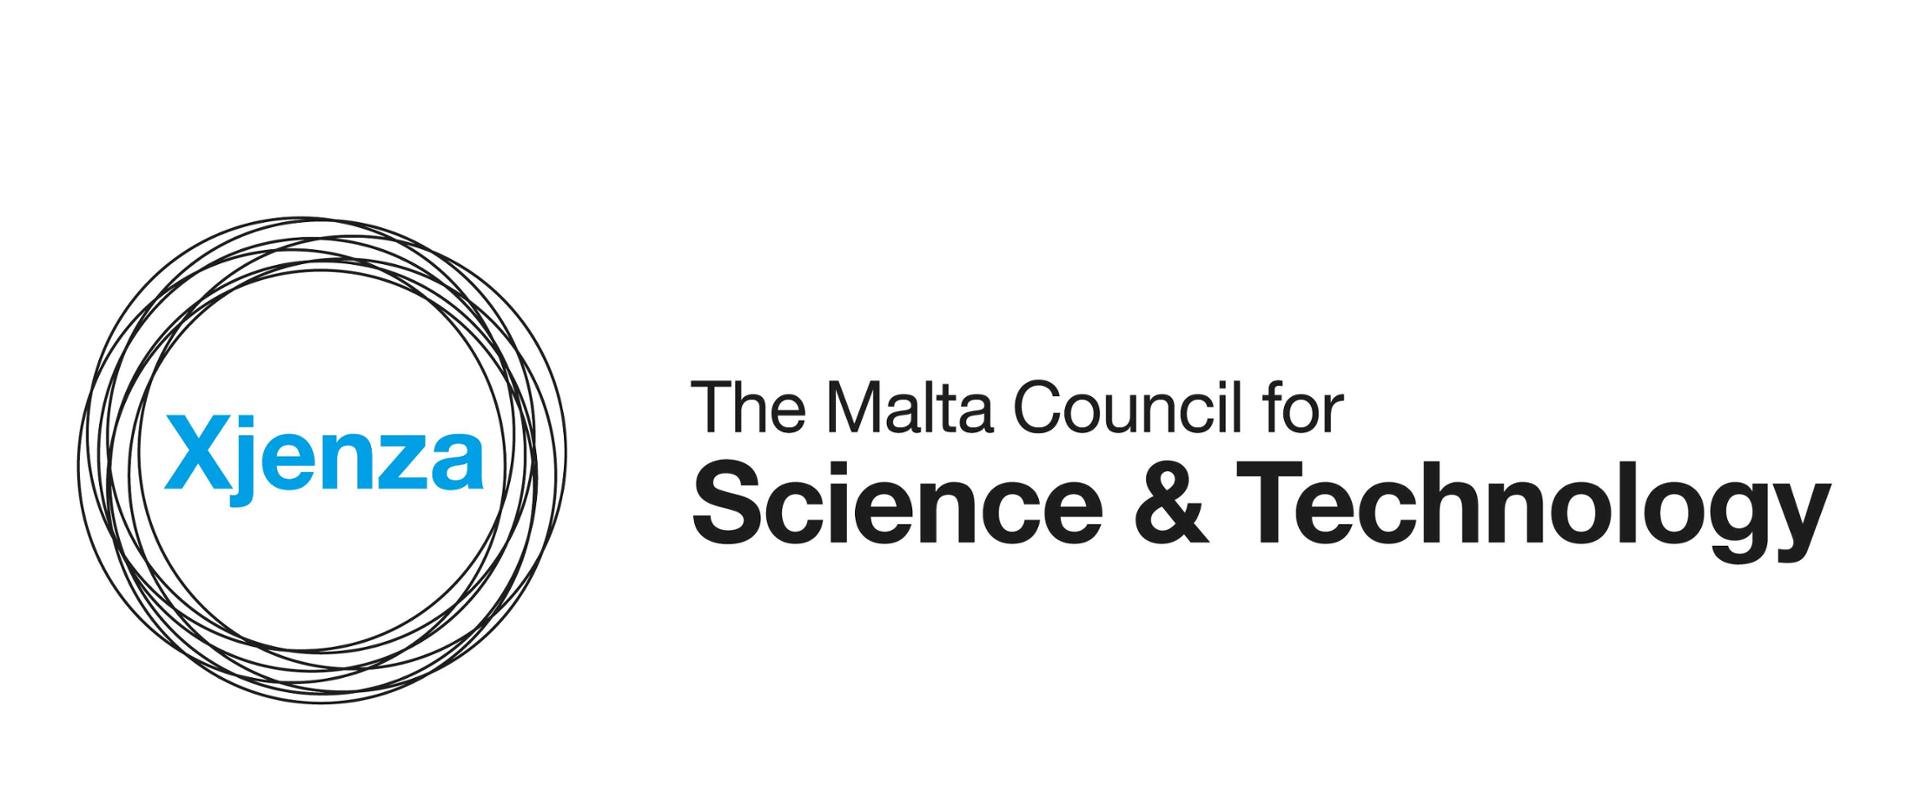 Xjenza in black circle on white background, next to it there is an inscription "The Malta Council for Science and Technology"